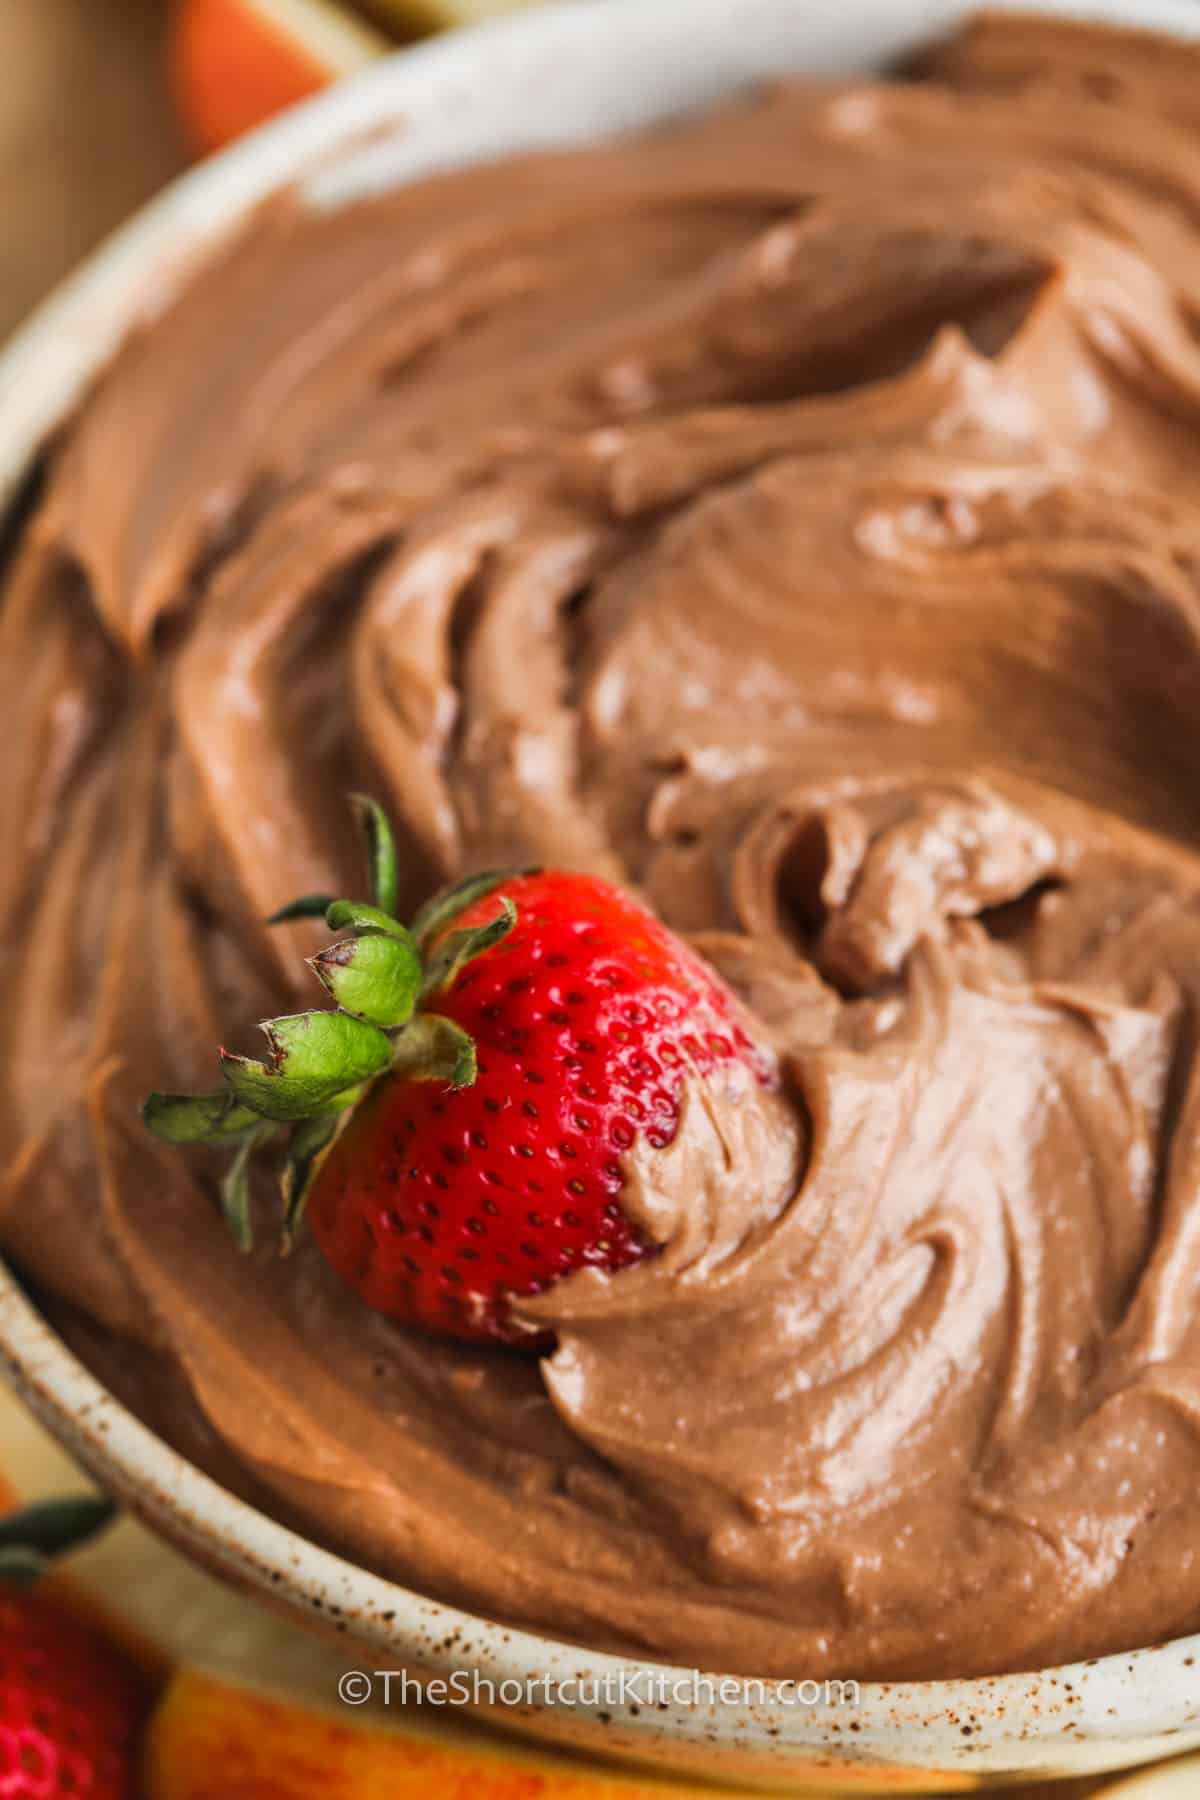 Nutella Fruit Dip with a strawberry